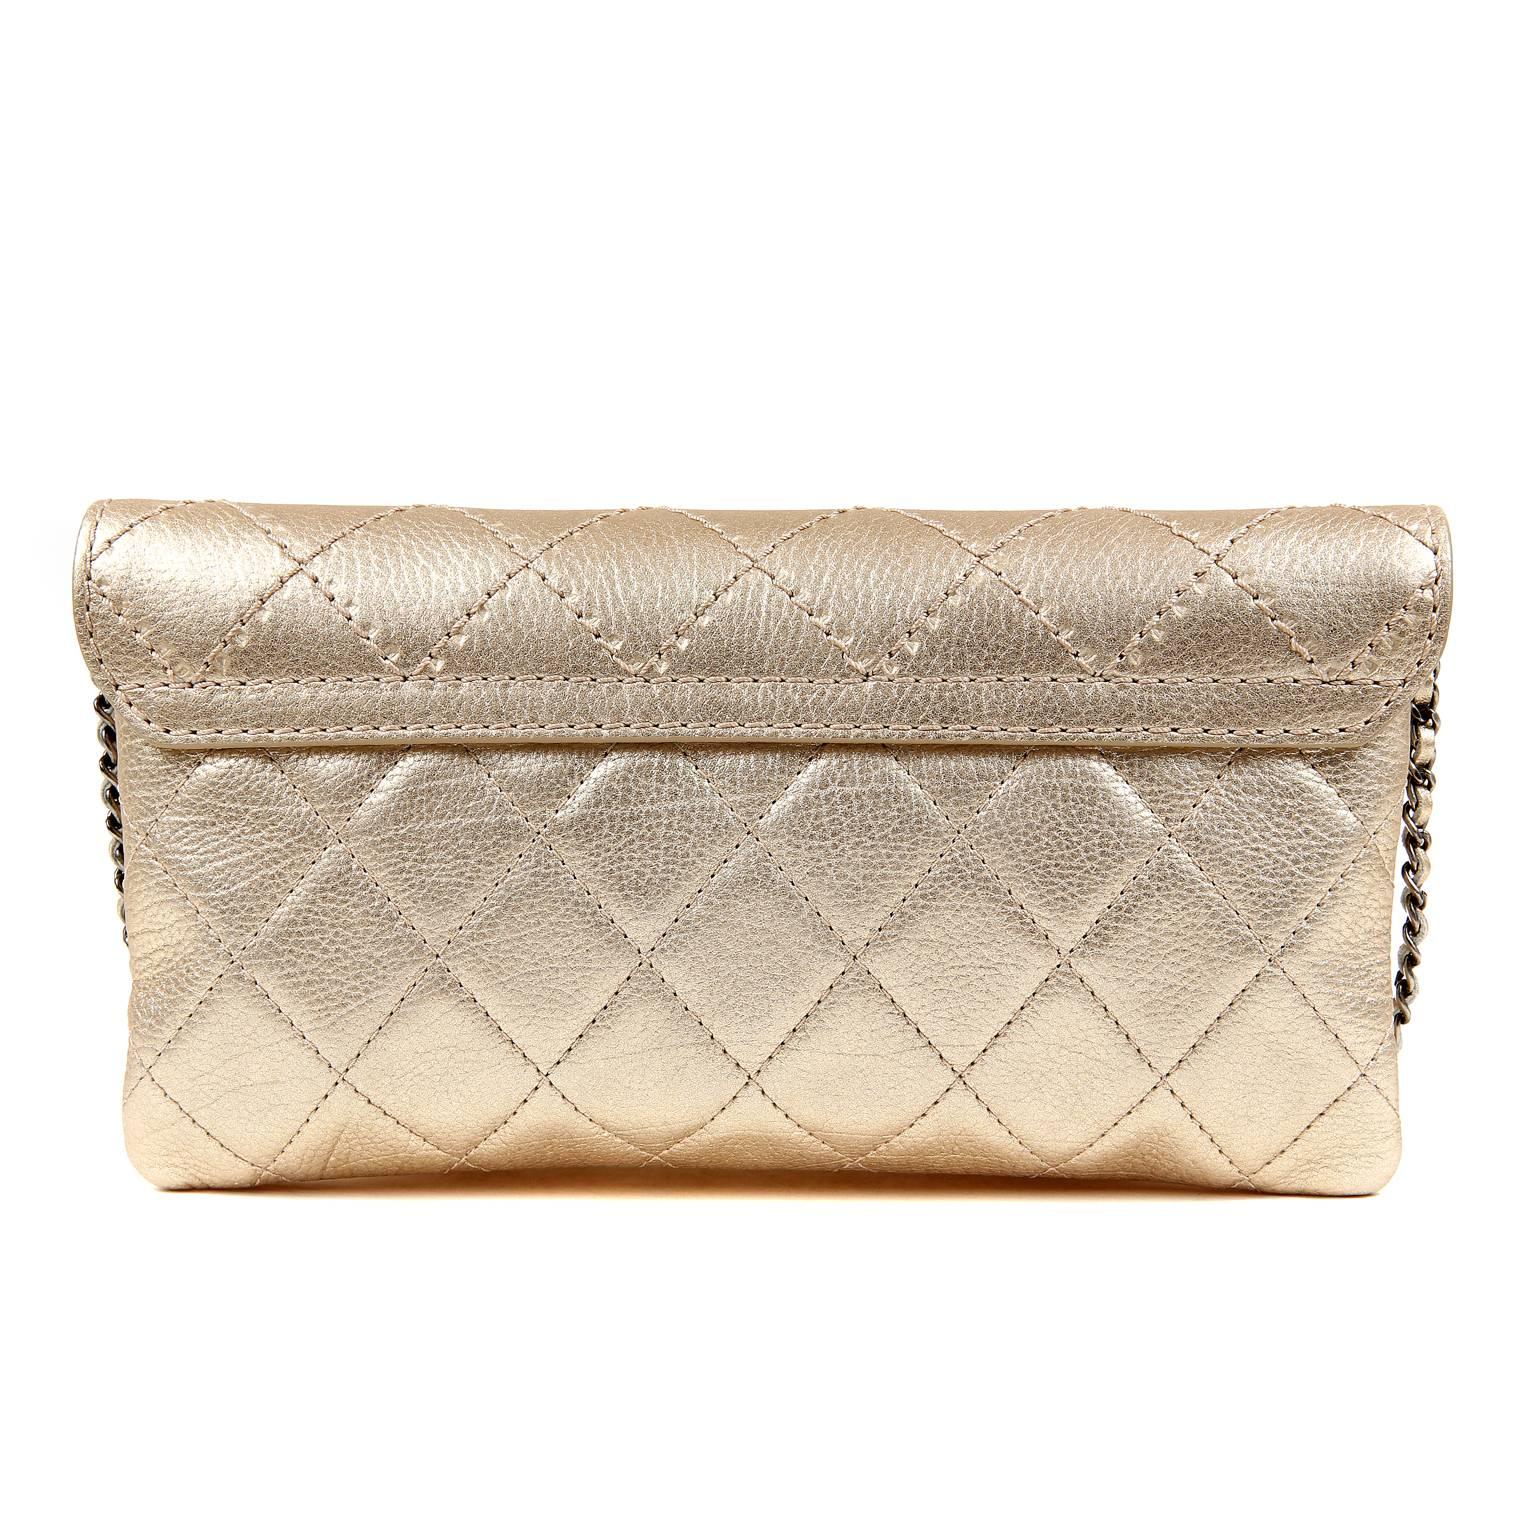 Chanel Gold Leather Cross Body Bag- PRISTINE, appearing never carried  Extremely versatile, this piece doubles as a clutch and combines metallics brilliantly. 
Soft metallic gold leather has a light pebbled texture and is further quilted in